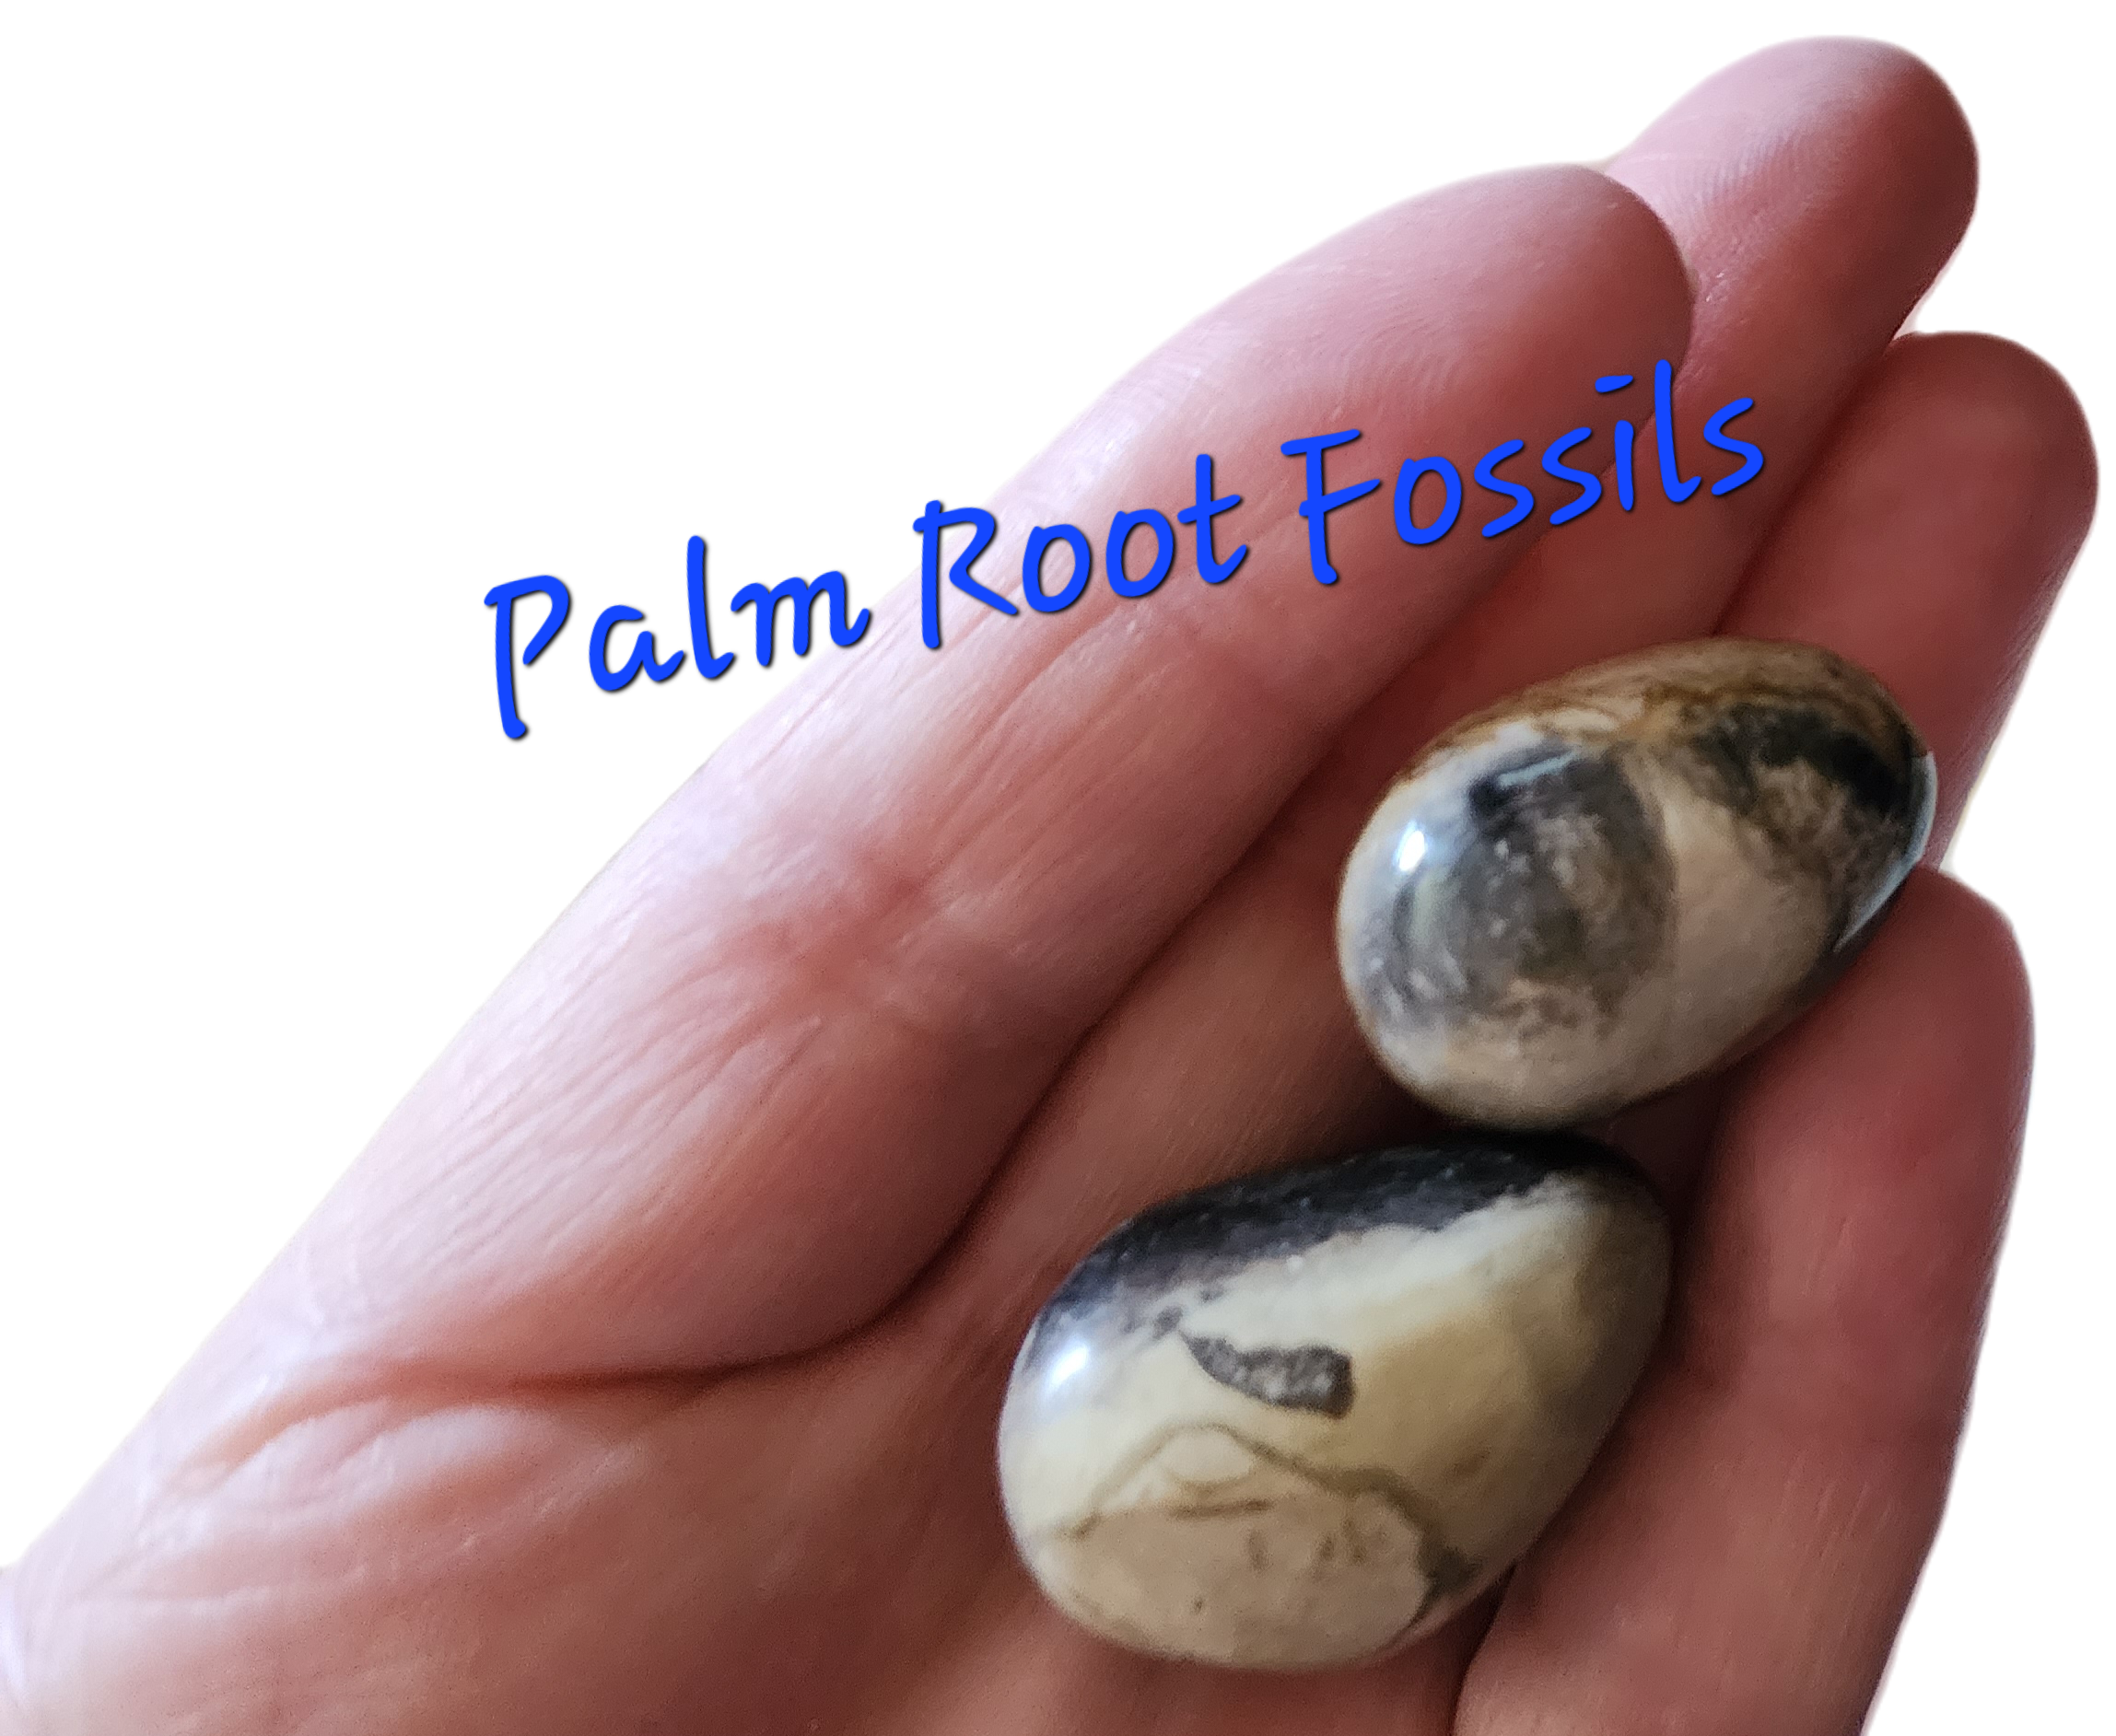 Palm Root Fossil